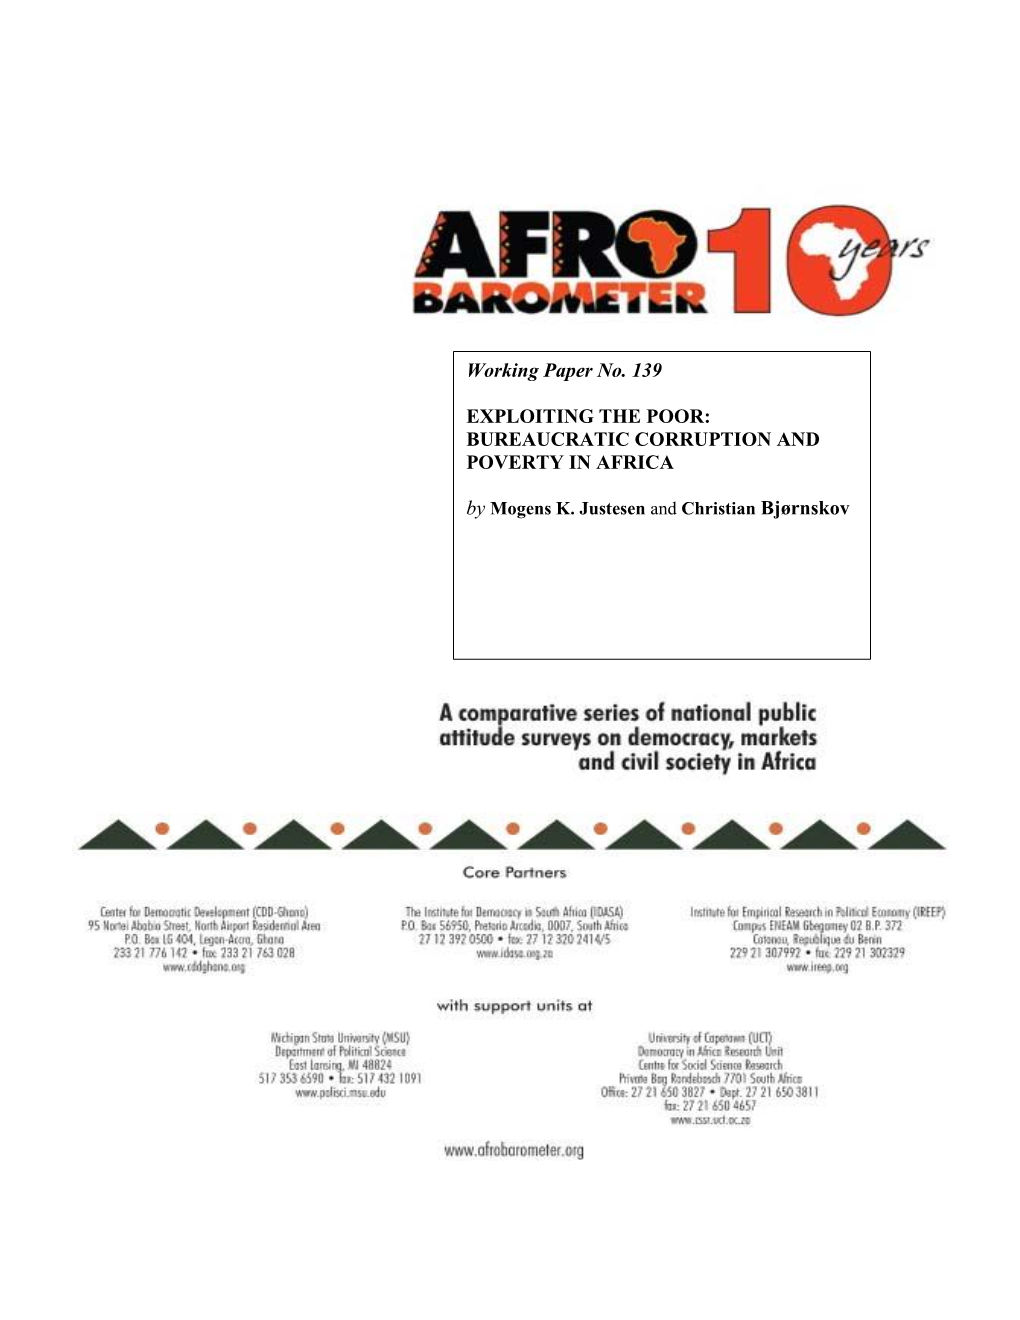 Exploiting the Poor: Bureaucratic Corruption and Poverty in Africa